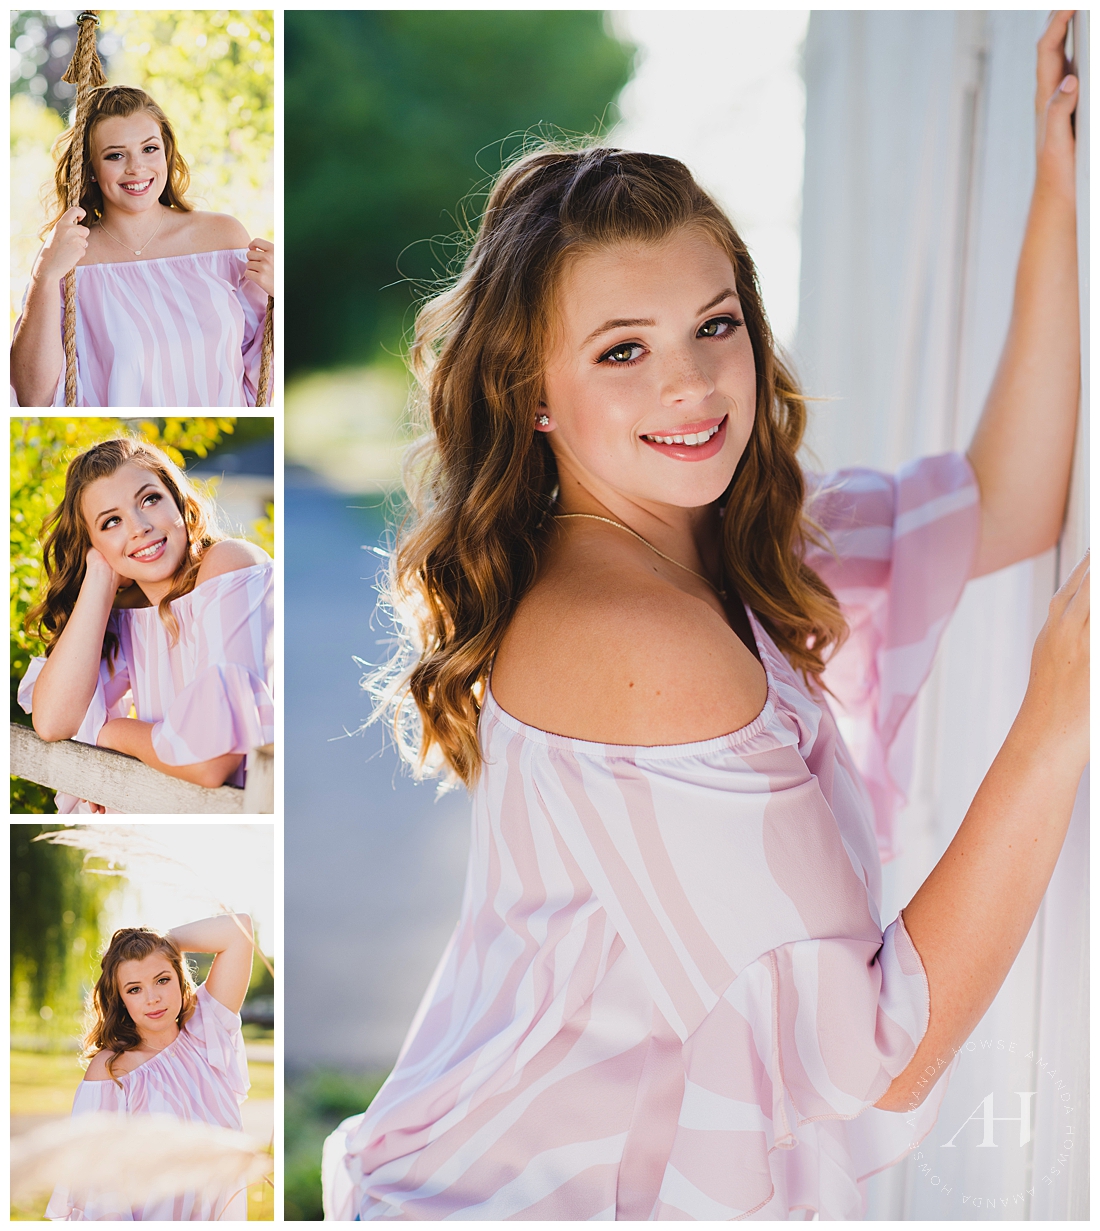 Casual Senior Portraits | How to Style Your Hair for Senior Portraits, Hair and Makeup Ideas for Senior Girls, High School Portraits | Photographed by Tacoma Senior Photographer Amanda Howse